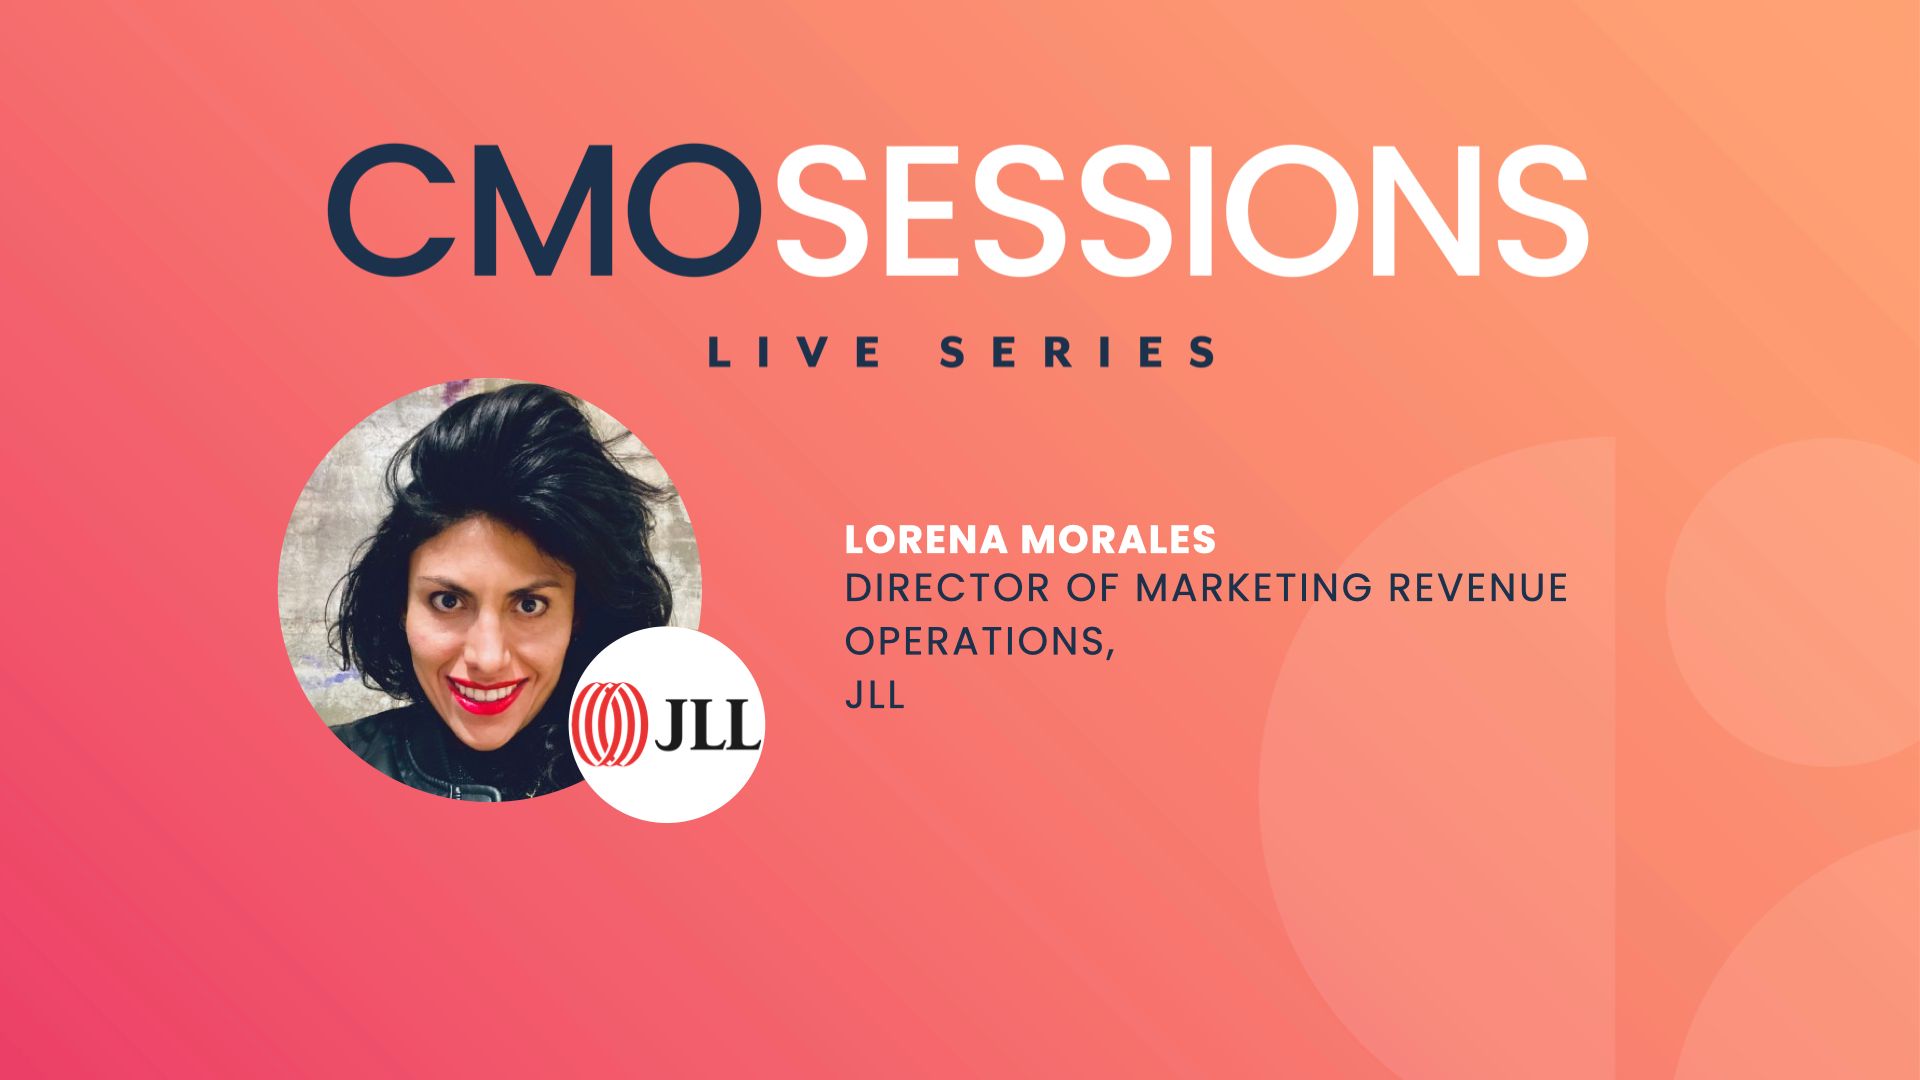 CMO sessions - live series